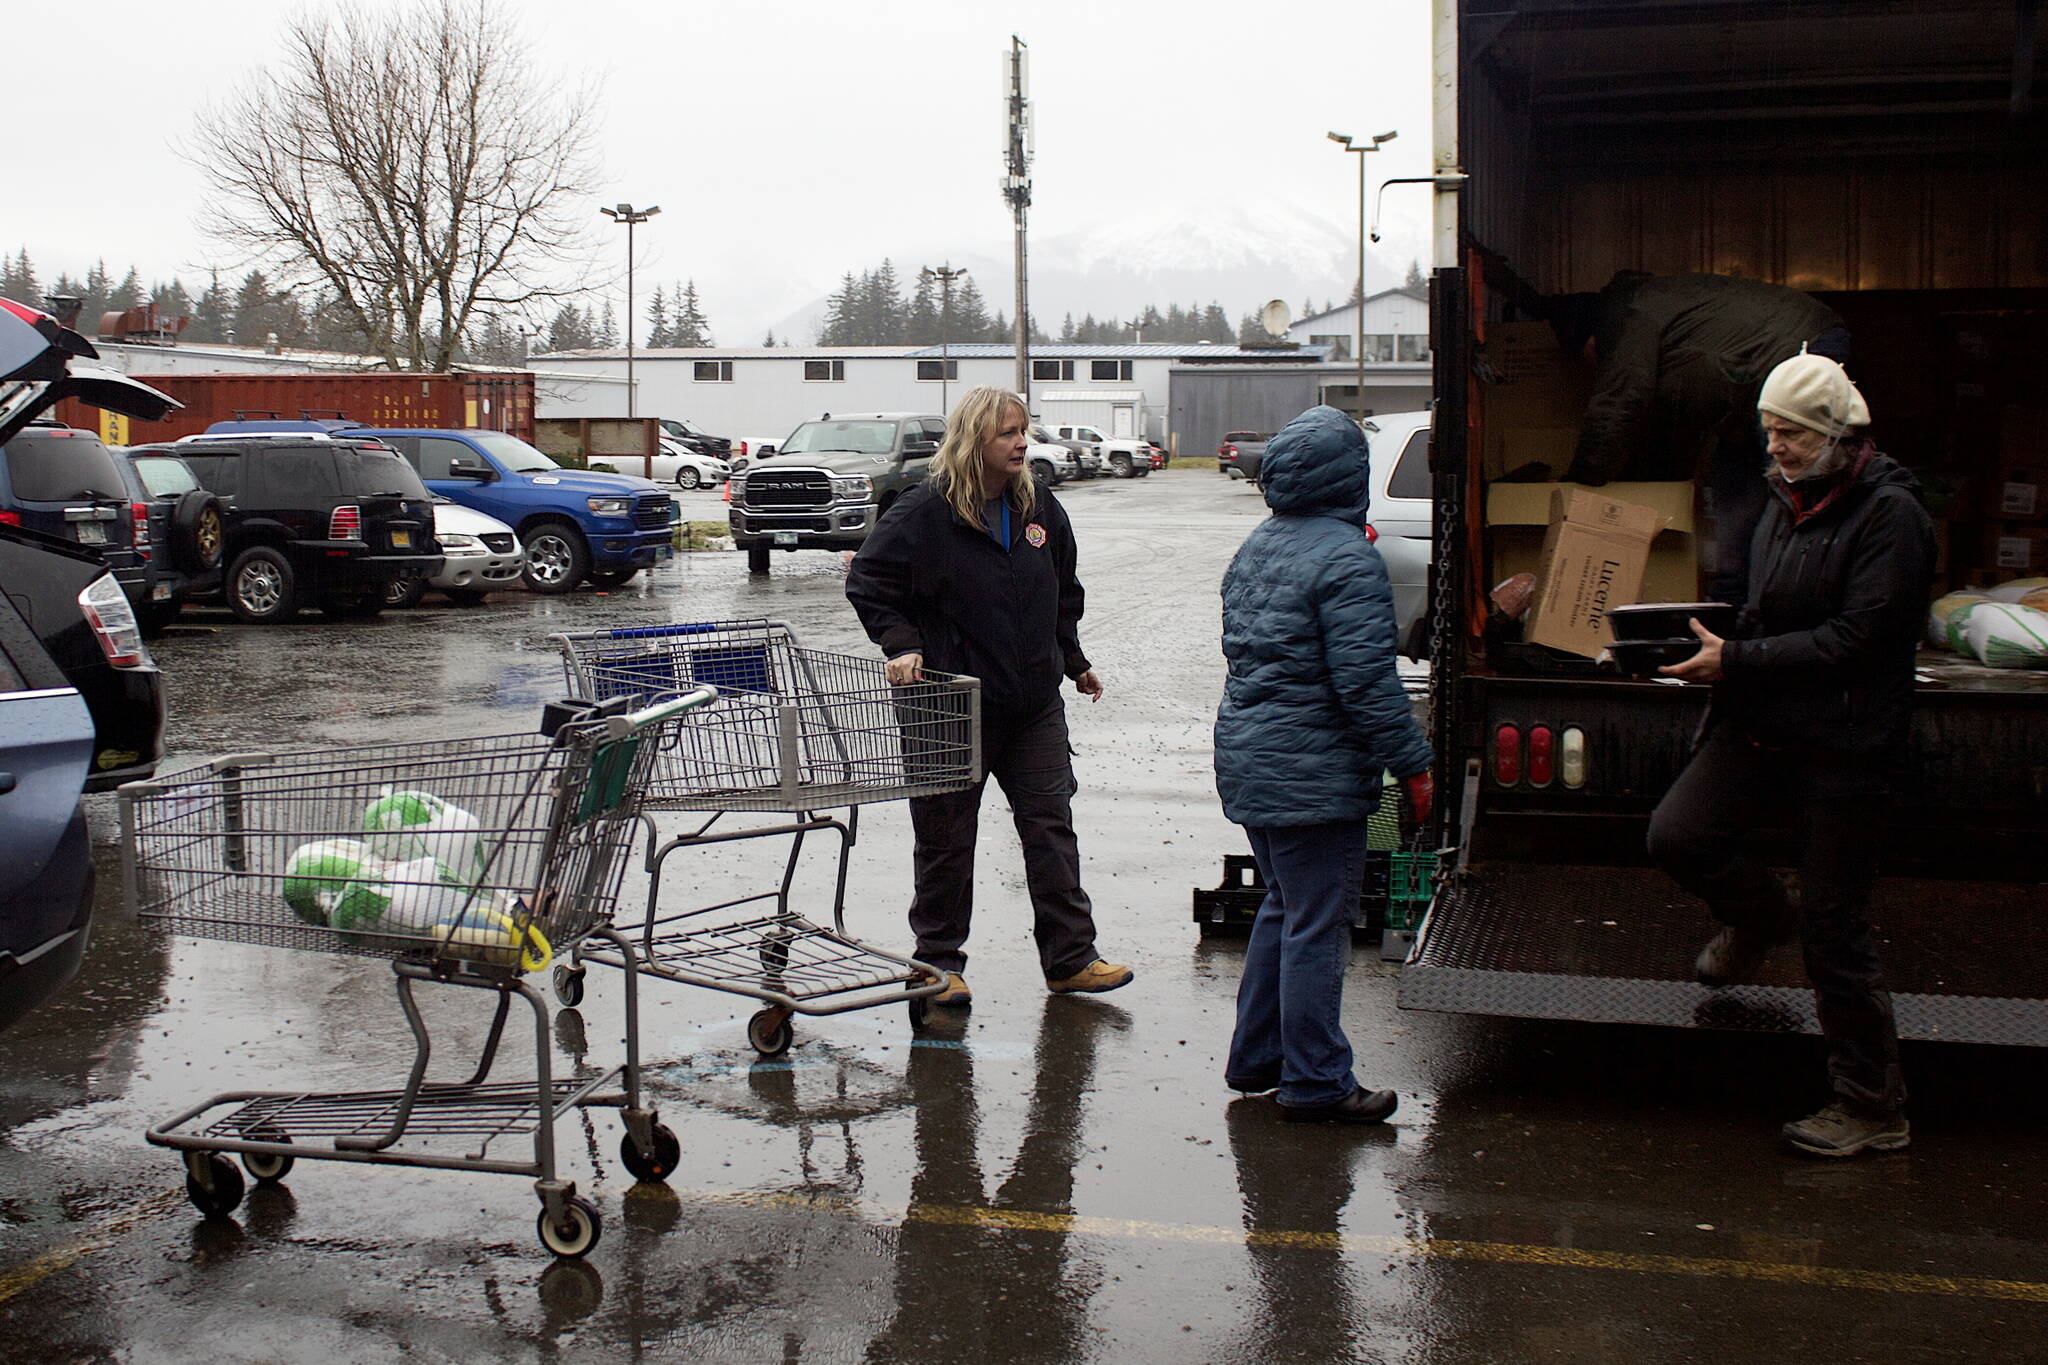 Volunteers load Thanksgiving grocery baskets into vehicles for Saturday morning delivery in the St. Vincent de Paul parking lot.  (Mark Sabbatini / Juneau Empire)